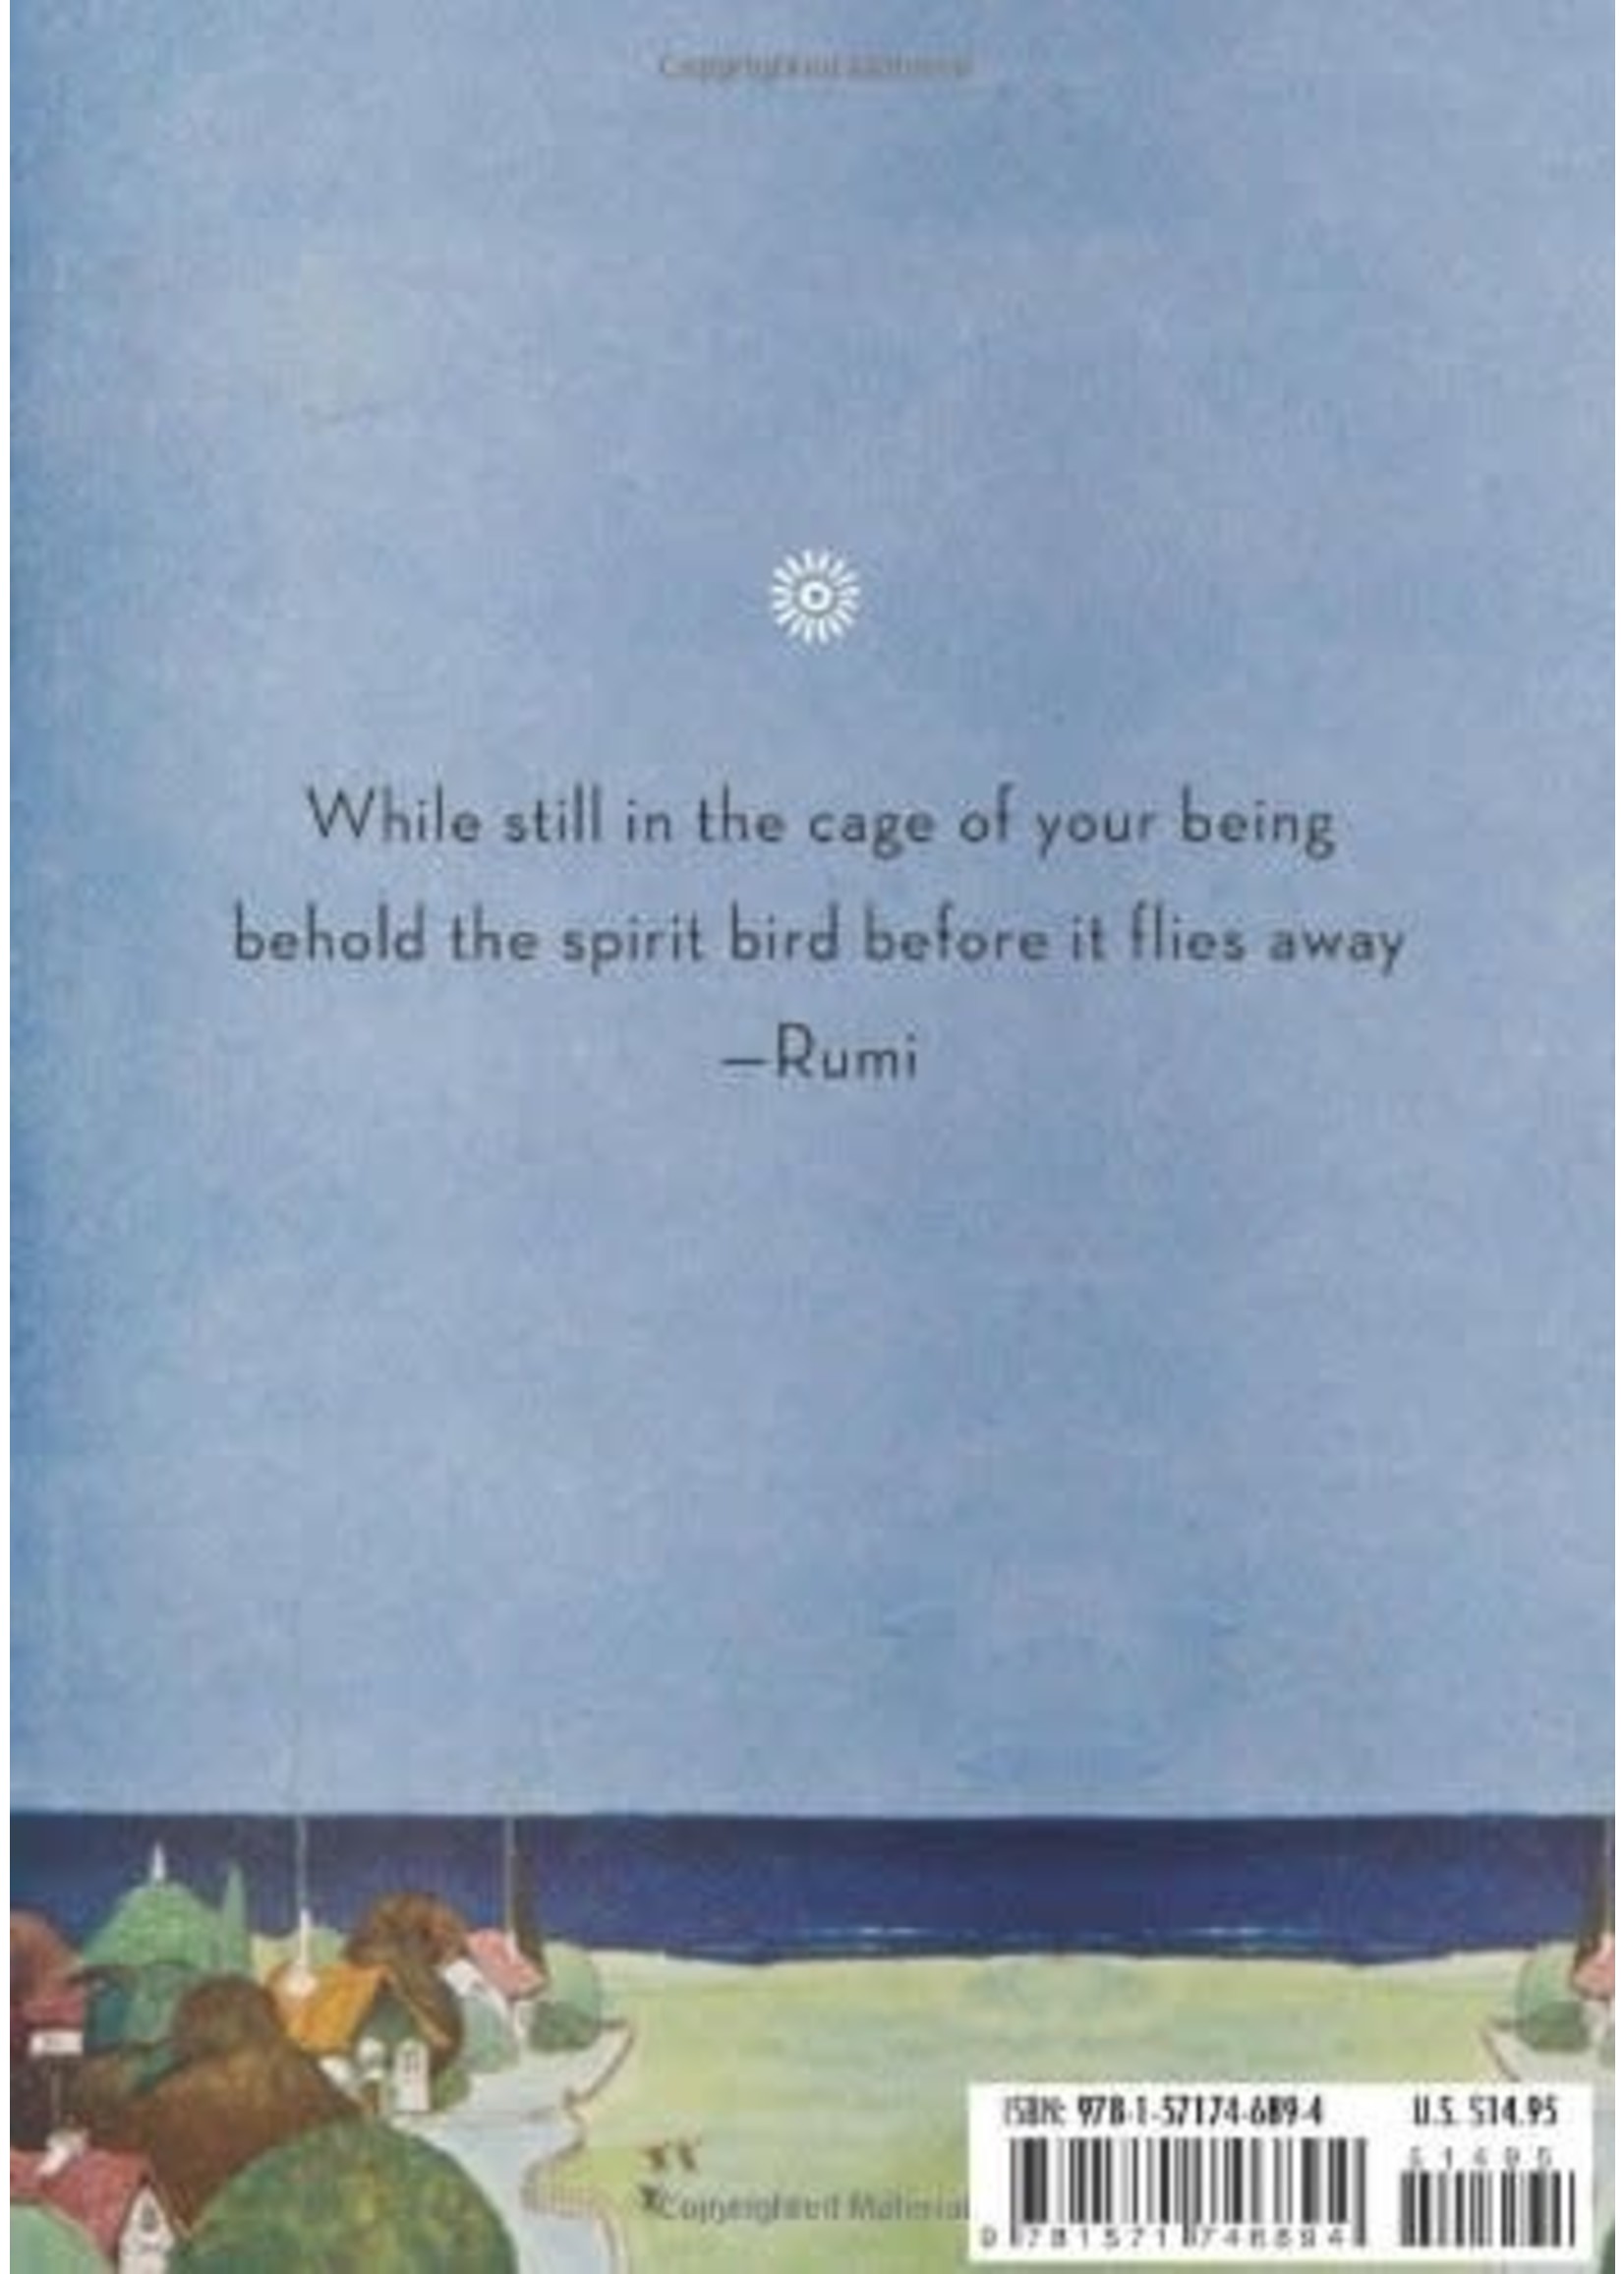 Rumi's Little Book of Life  The Garden of the Soul, the Heart, and the Spirit